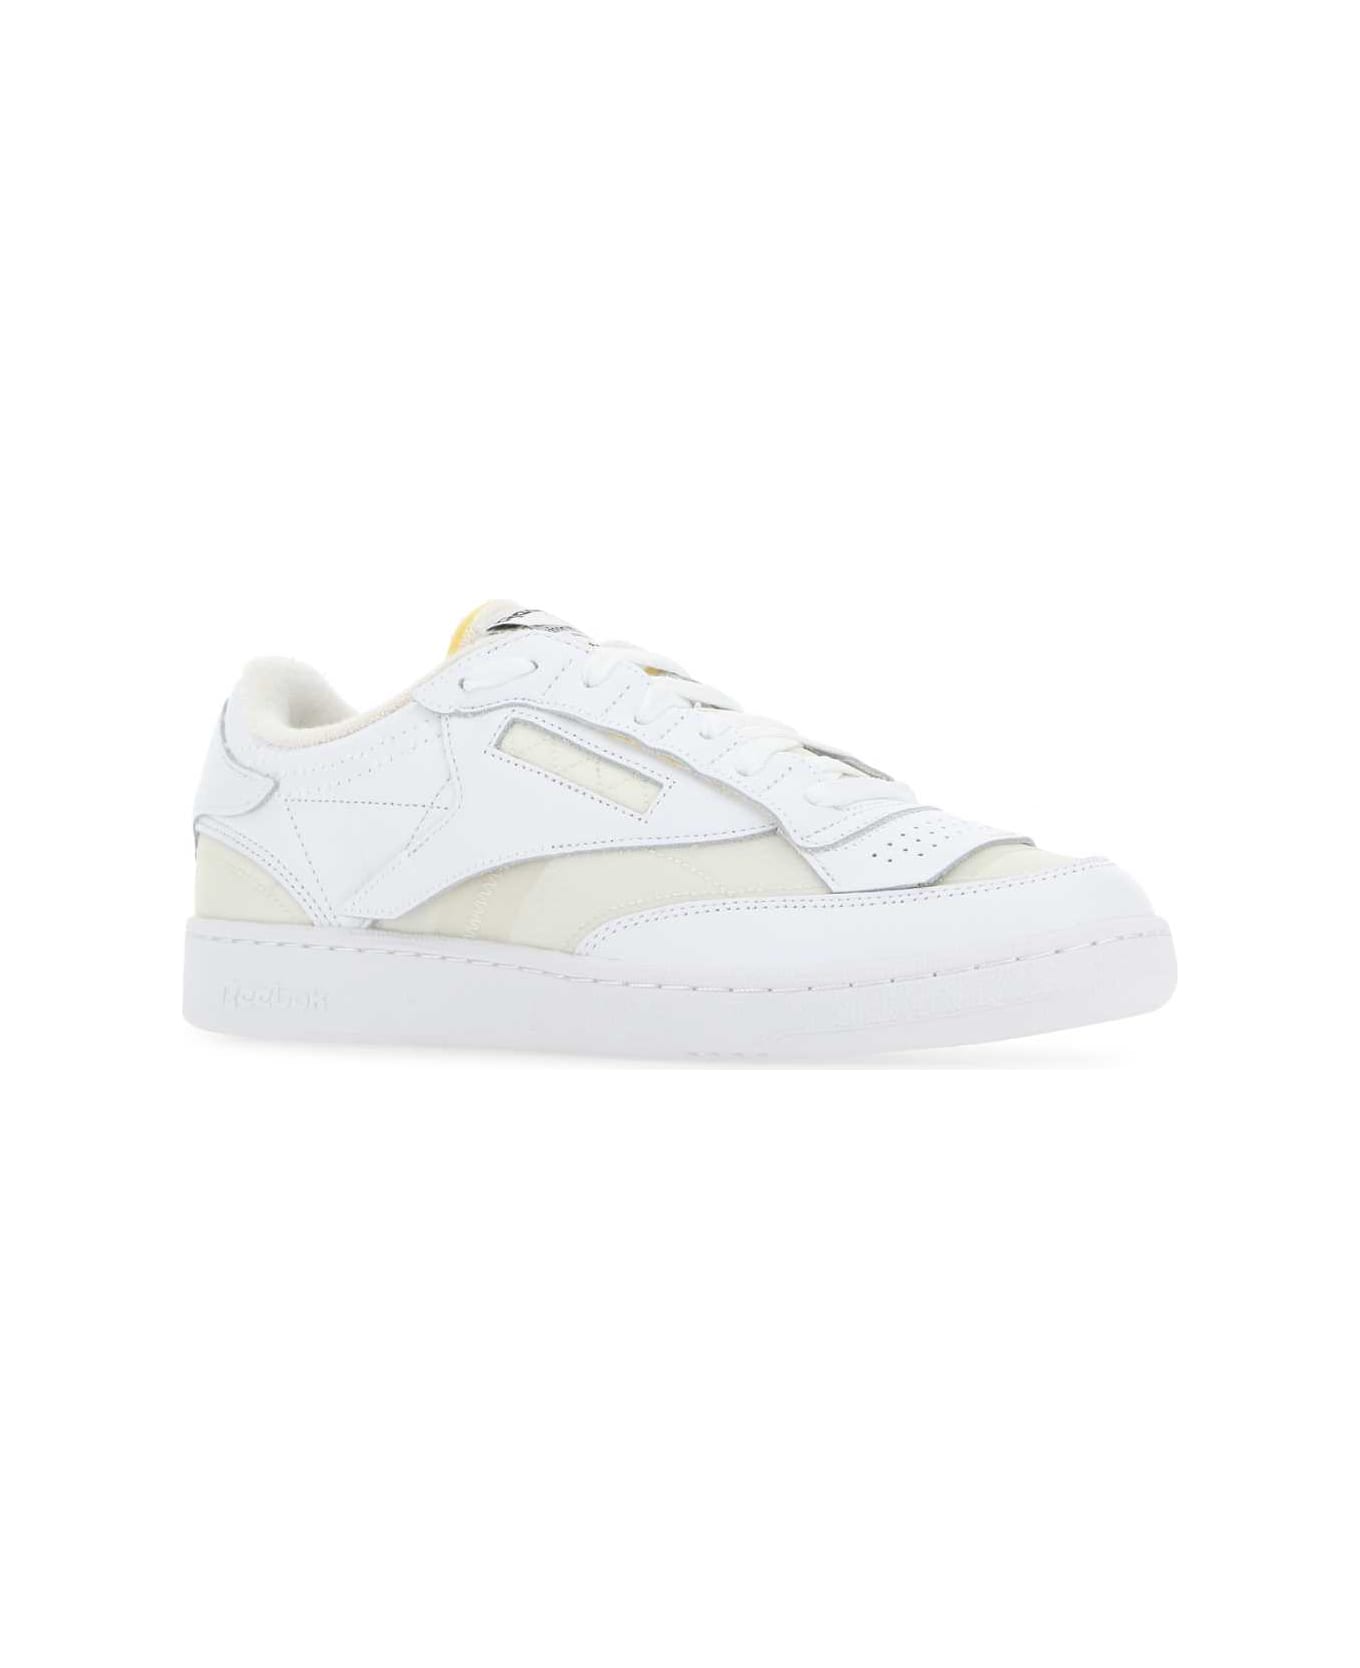 Reebok White Leather And Fabric Project 0 Cc Memory Of V2 Sneakers - T1003 スニーカー